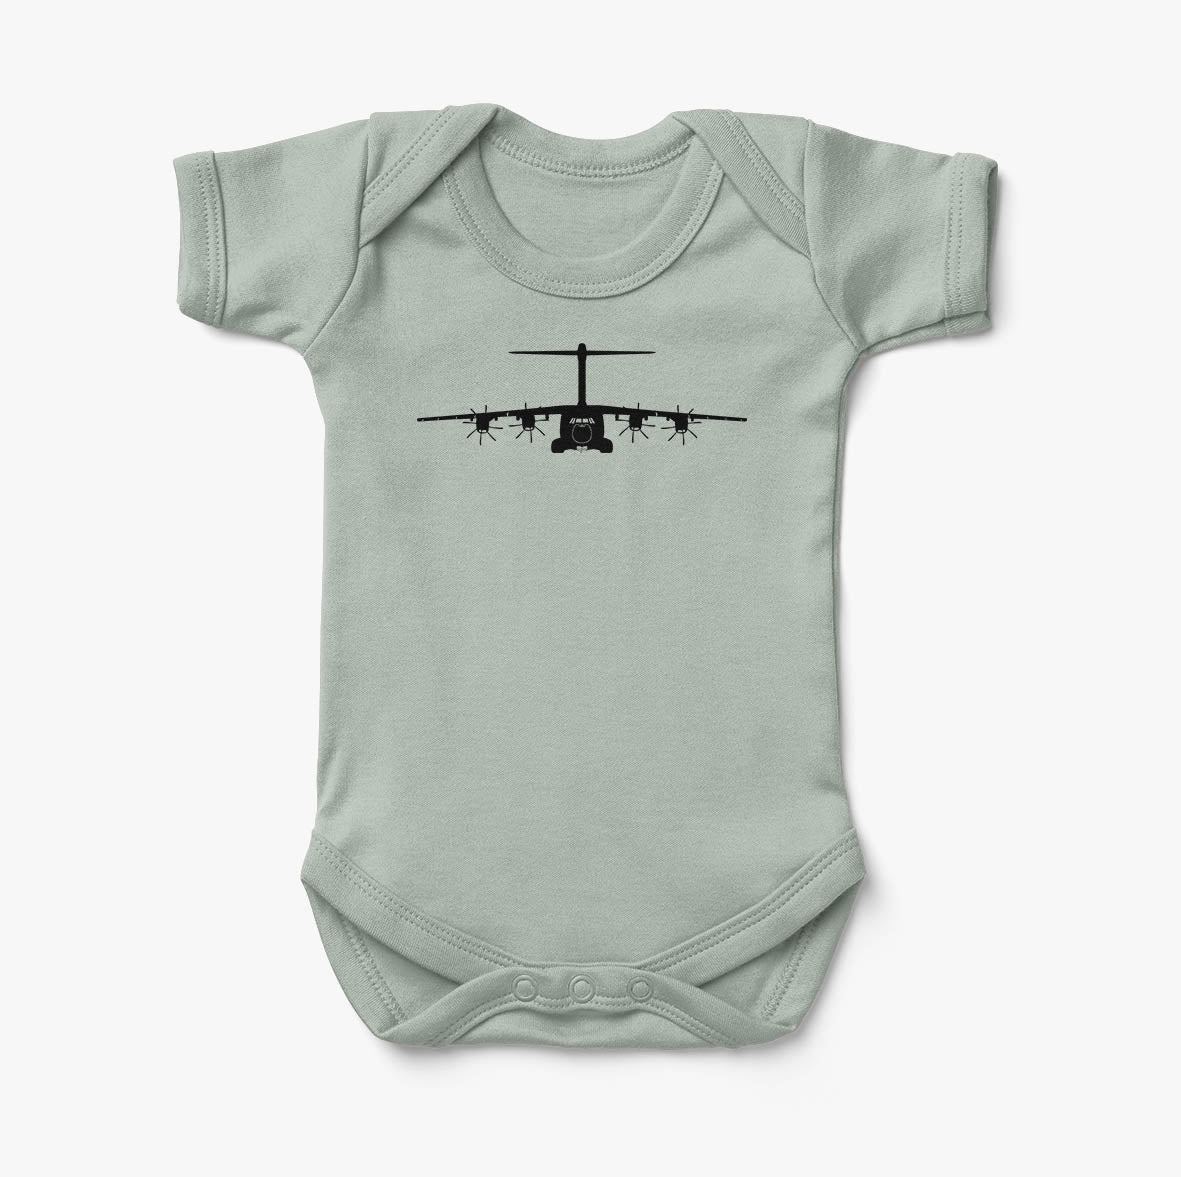 Airbus A400M Silhouette Designed Baby Bodysuits